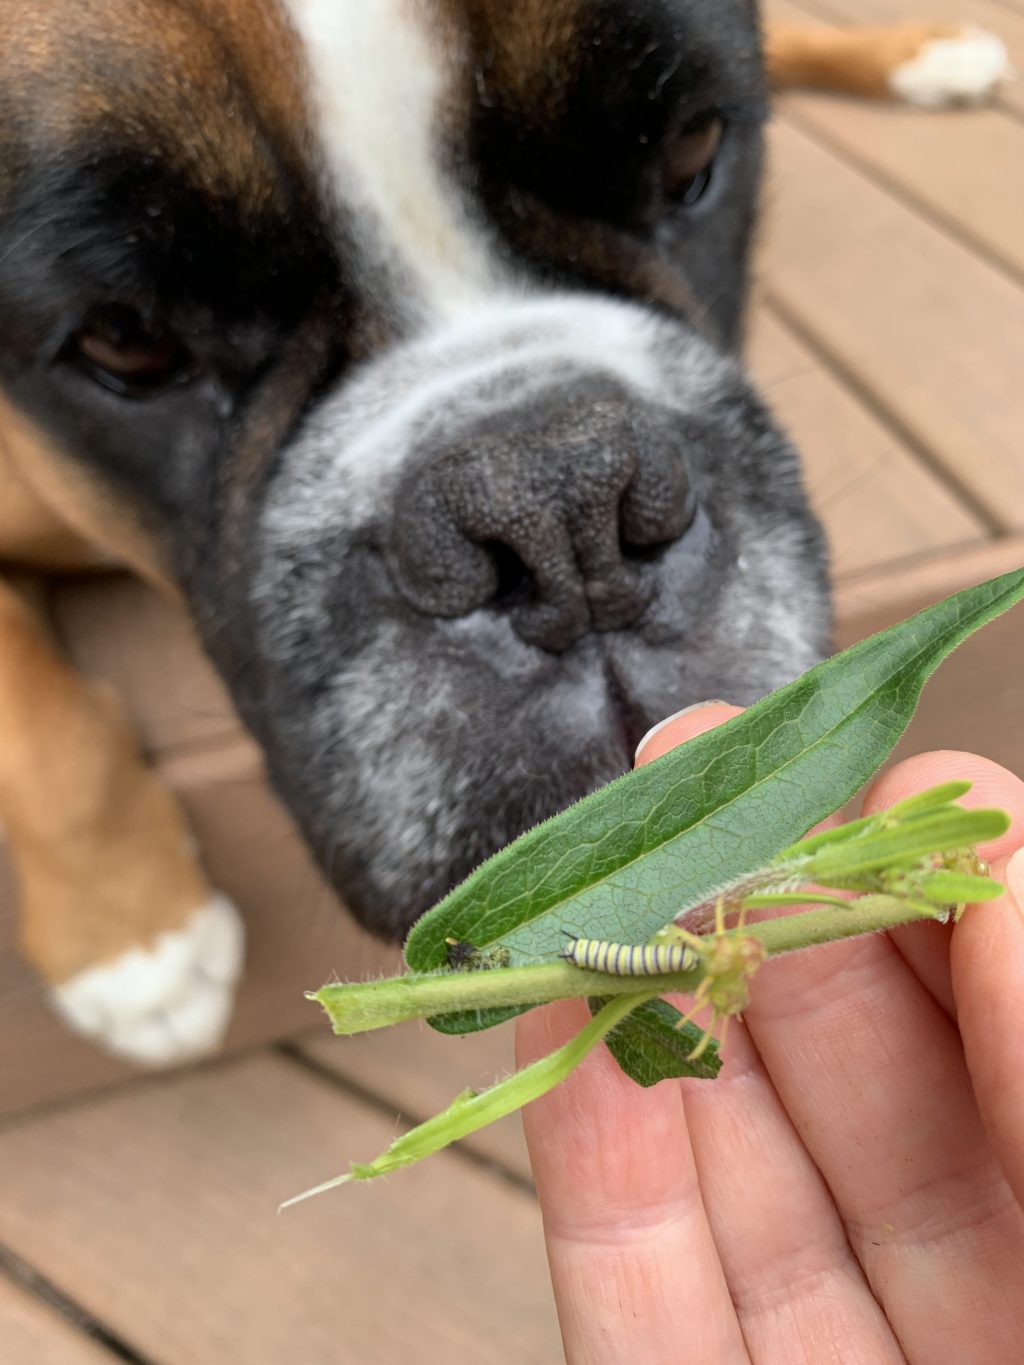 Louie and monarch caterpillar